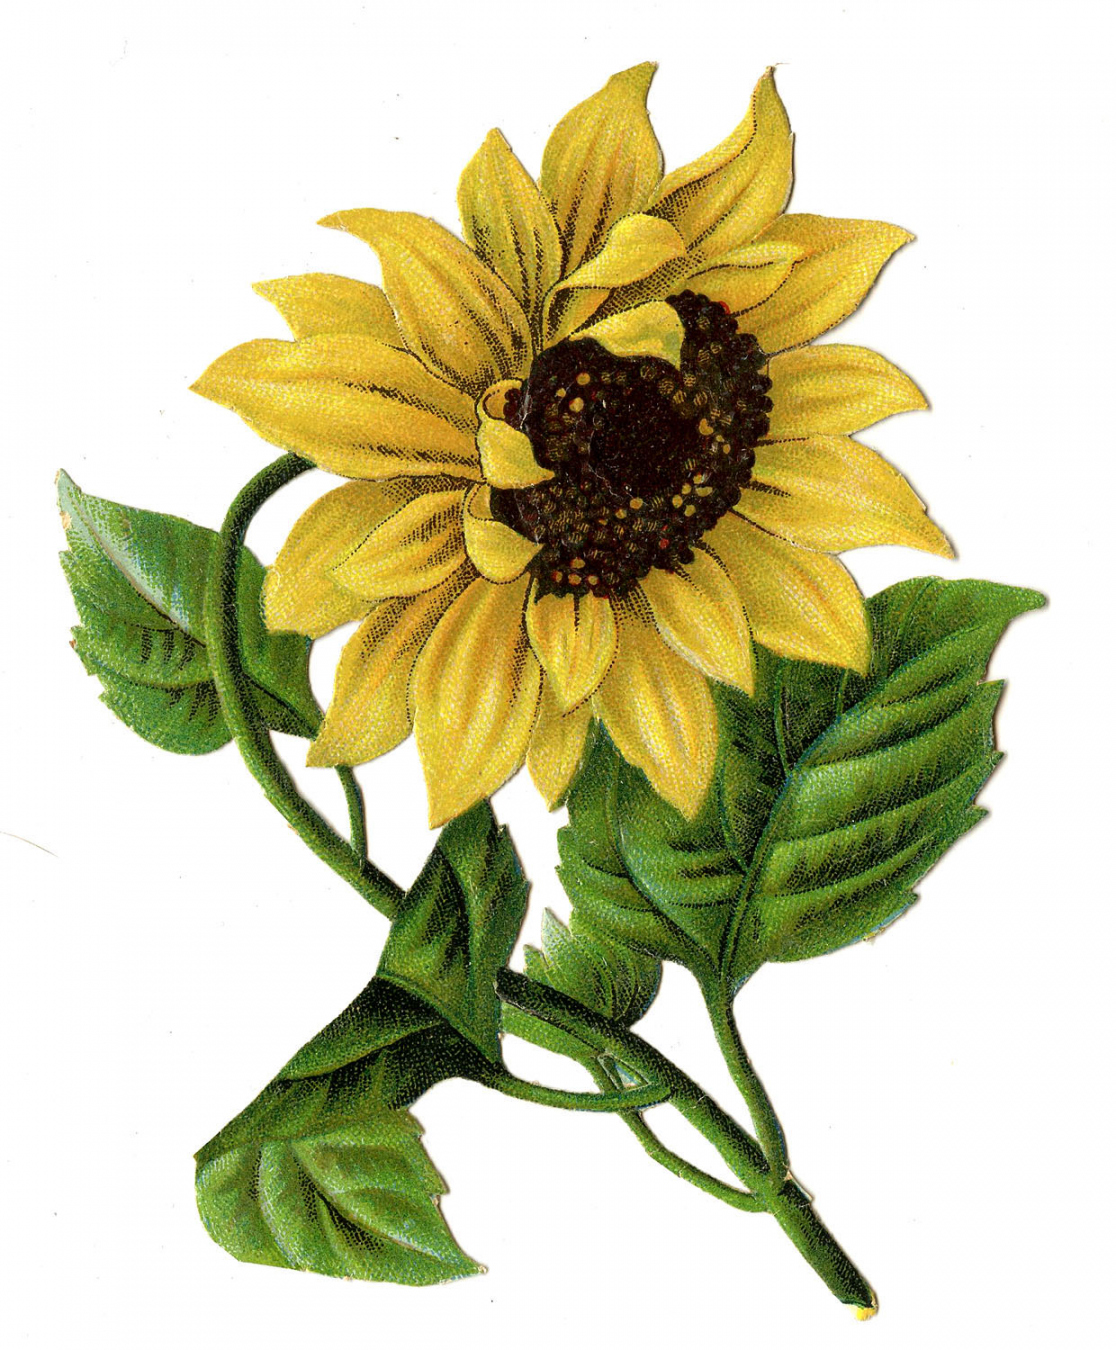 Sunflower Images - Beautiful Pictures! - The Graphics Fairy - FREE Printables - Free Sunflower Printables